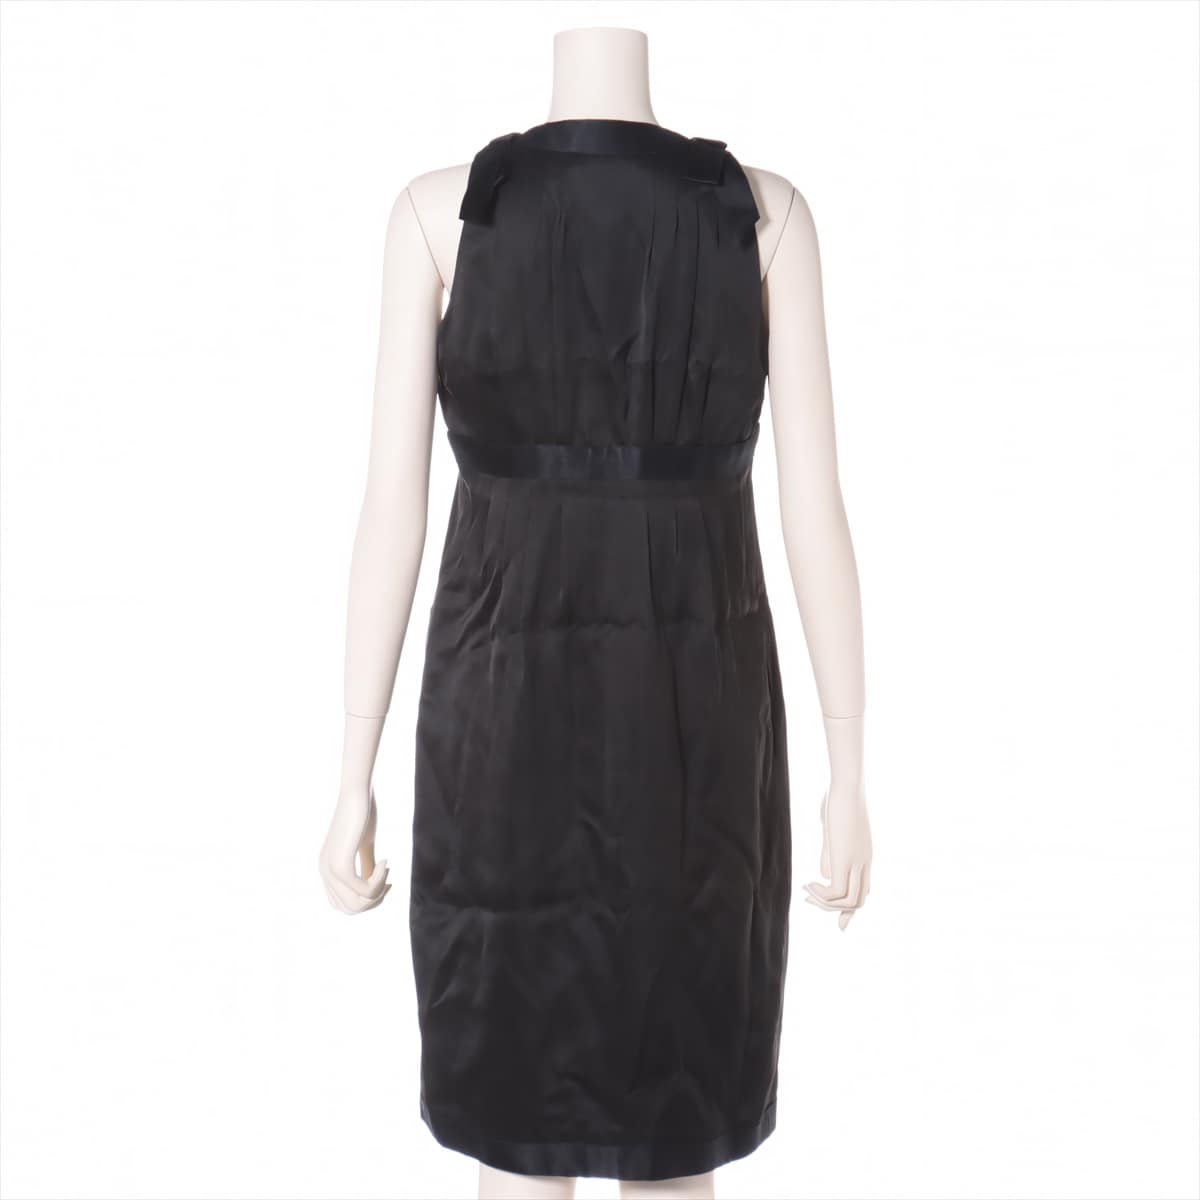 Chanel 07A Silk satin Sleeveless dress 36 Ladies' Black  with inner camisole